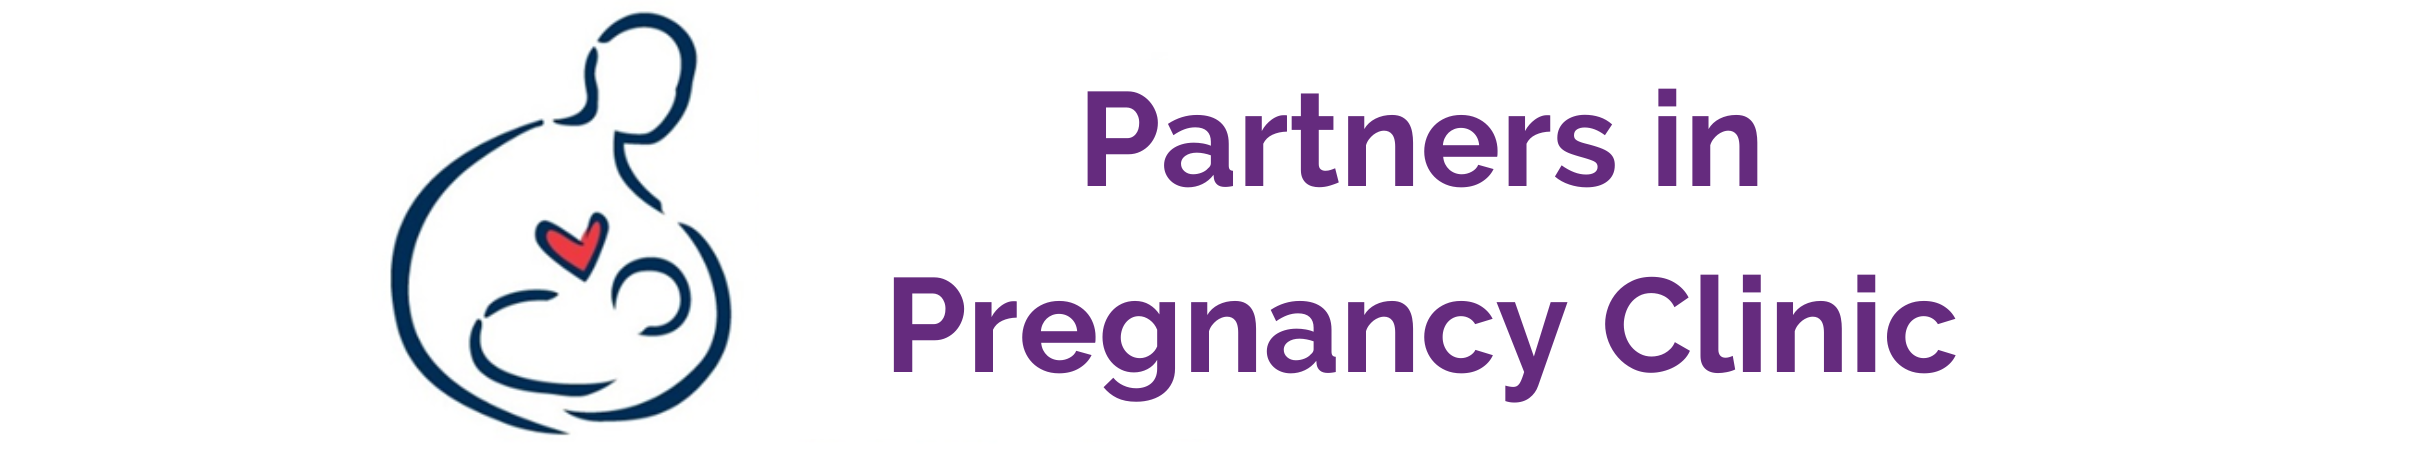 Partners in Pregnancy Clinic banner